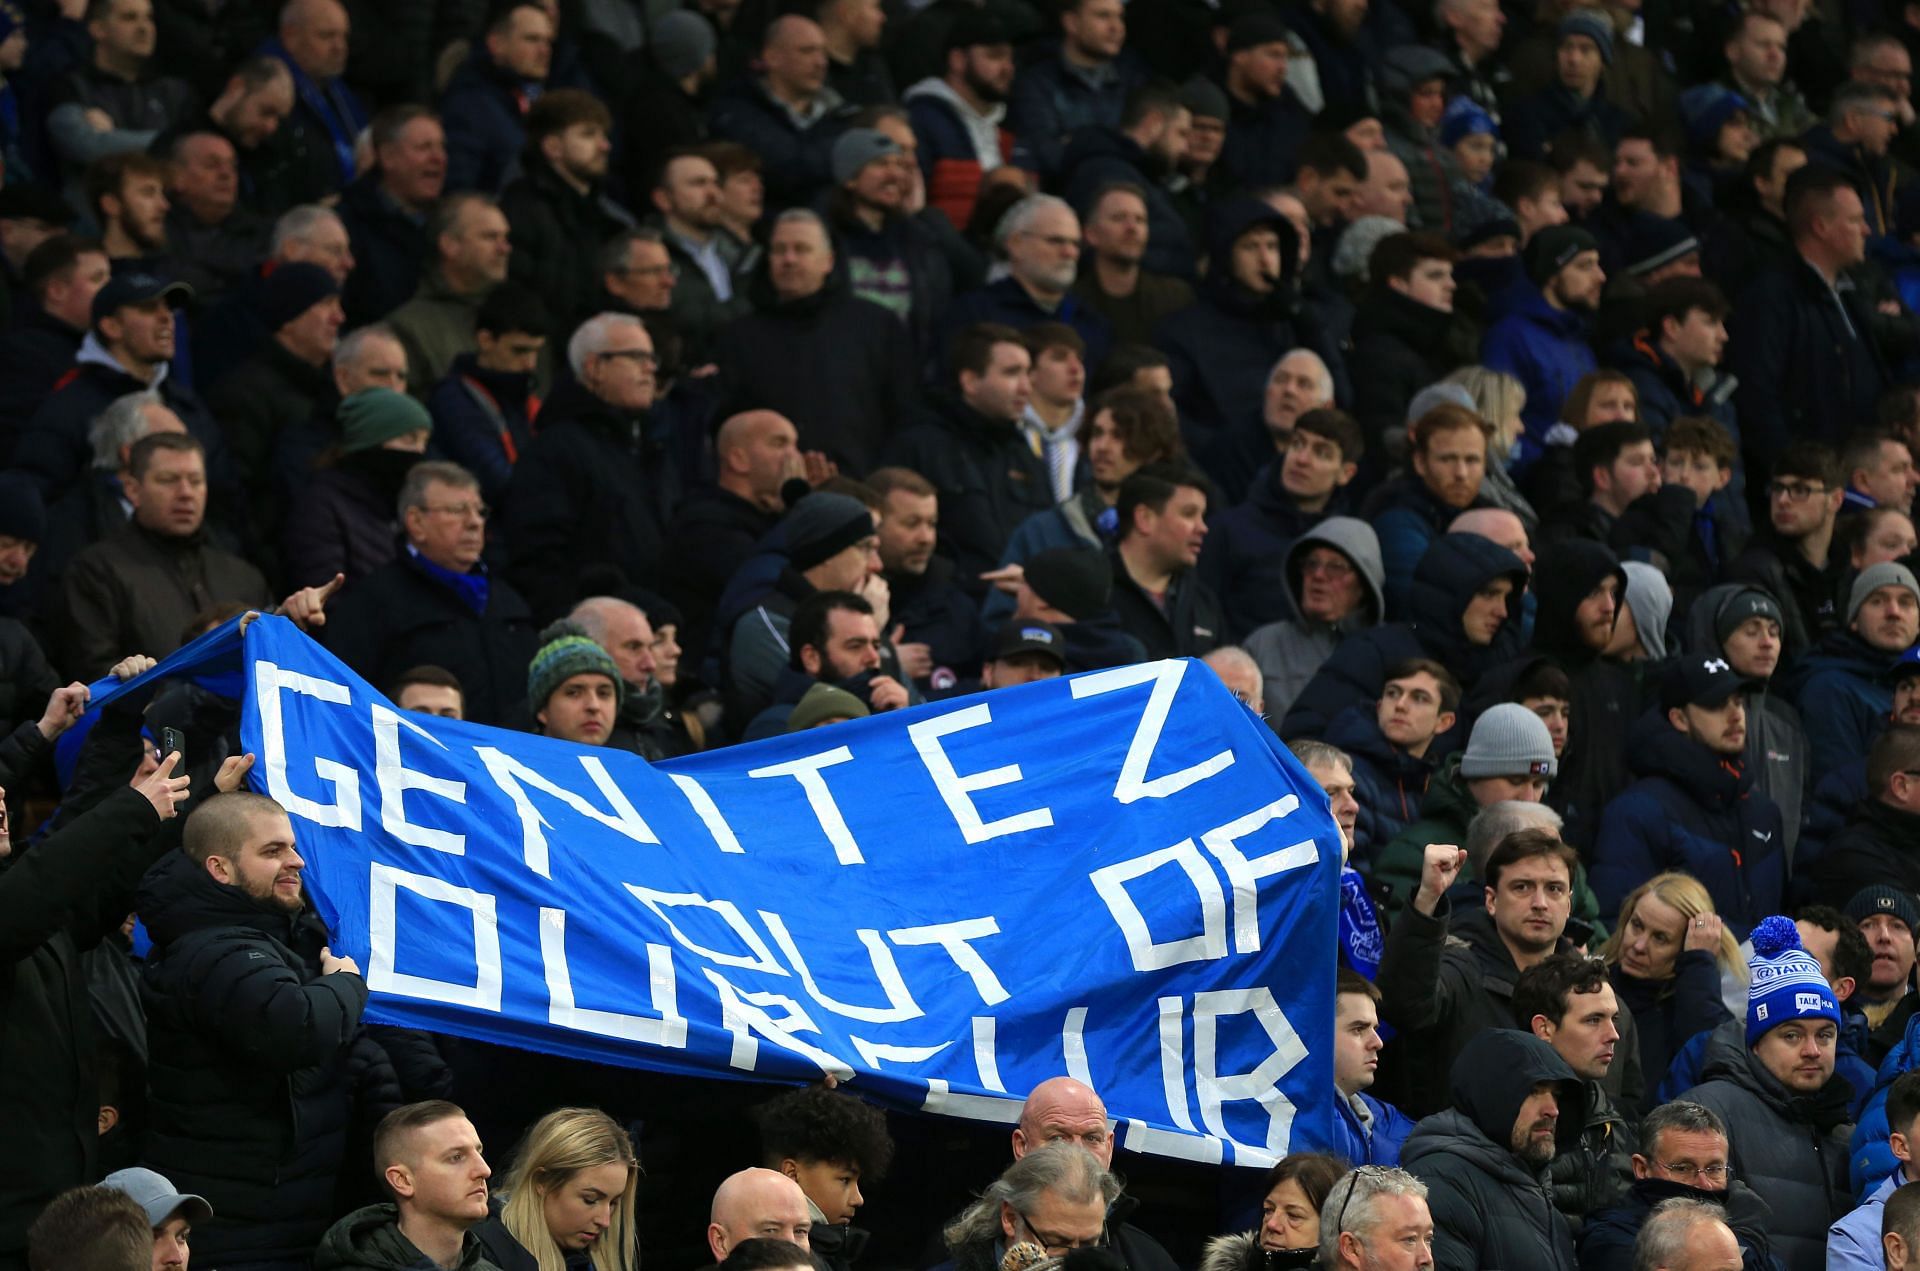 Rafa Benitez&#039;s spell as Everton coach saw him getting increasingly unpopular with the team&#039;s support base